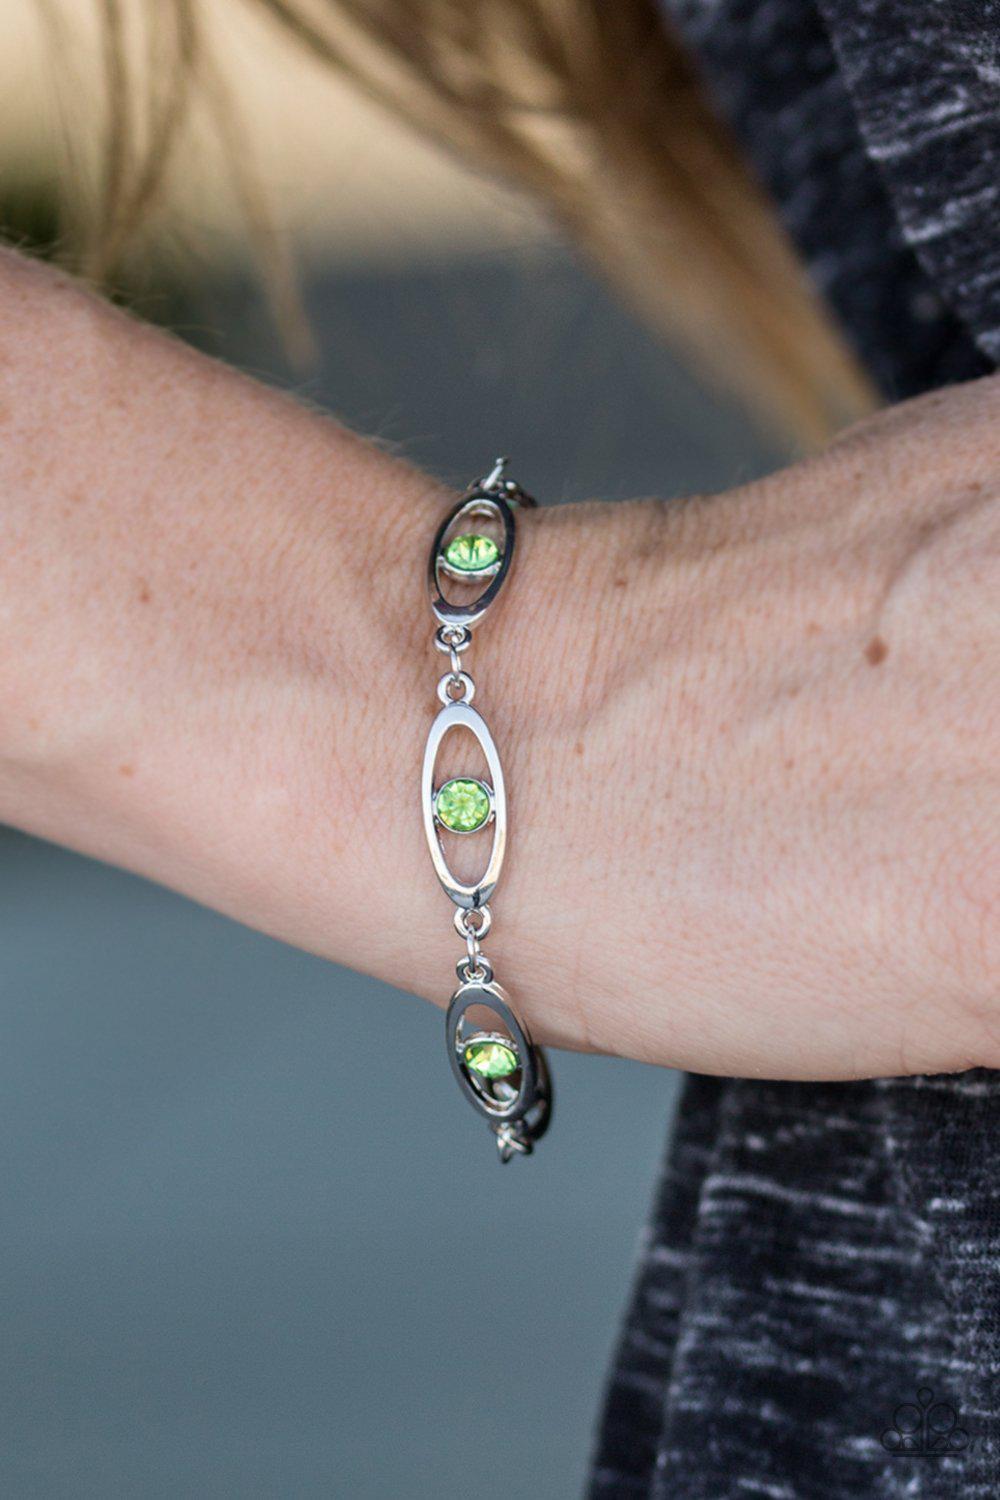 Starry Eyed Silver and Green Rhinestone Bracelet - Paparazzi Accessories-CarasShop.com - $5 Jewelry by Cara Jewels